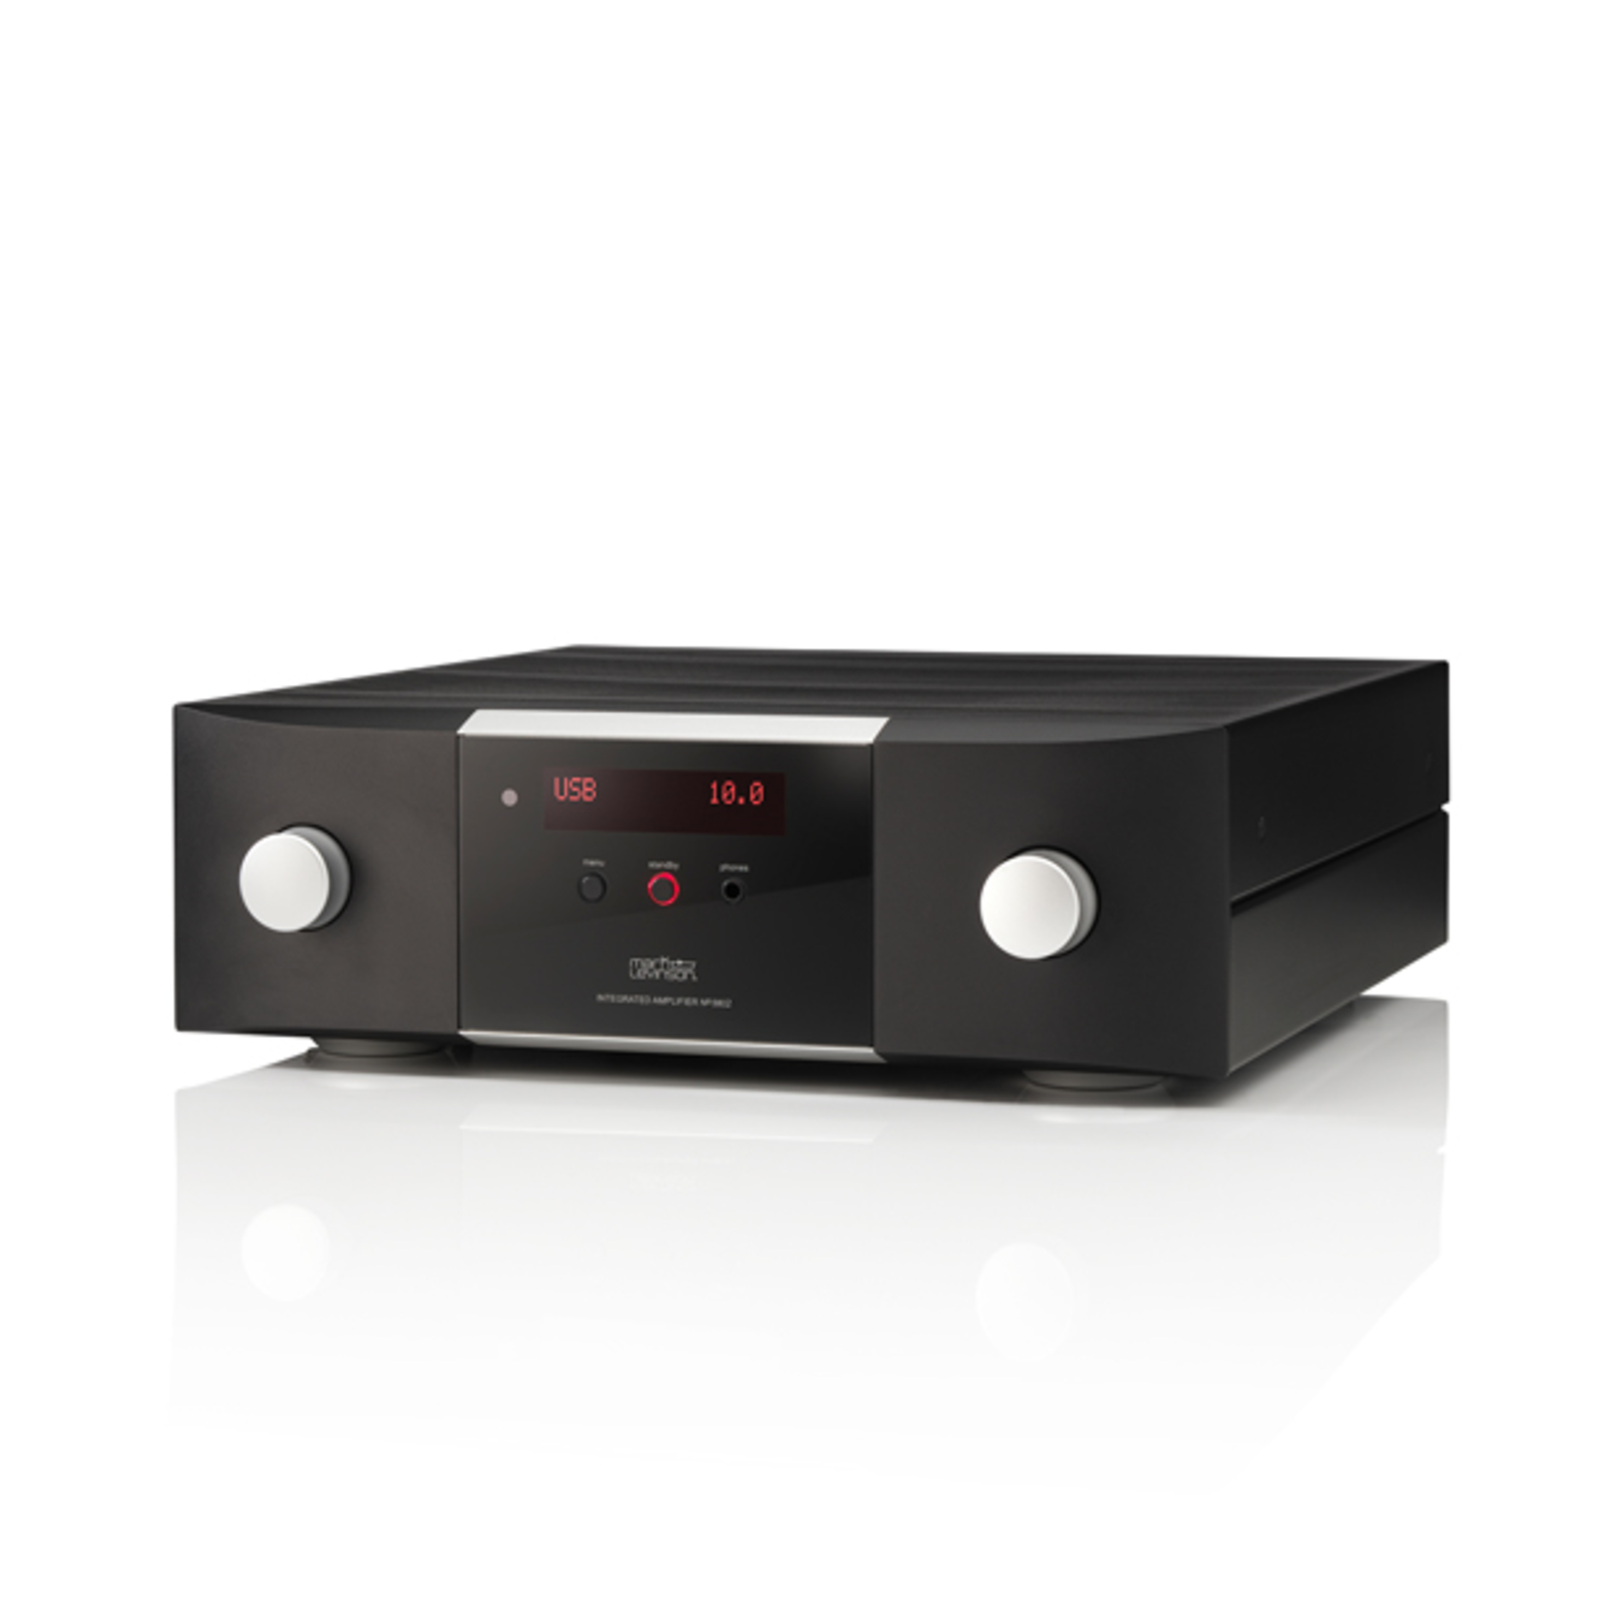 № 5802 - Black / Silver - Integrated Amplifier for Digital sources - Front